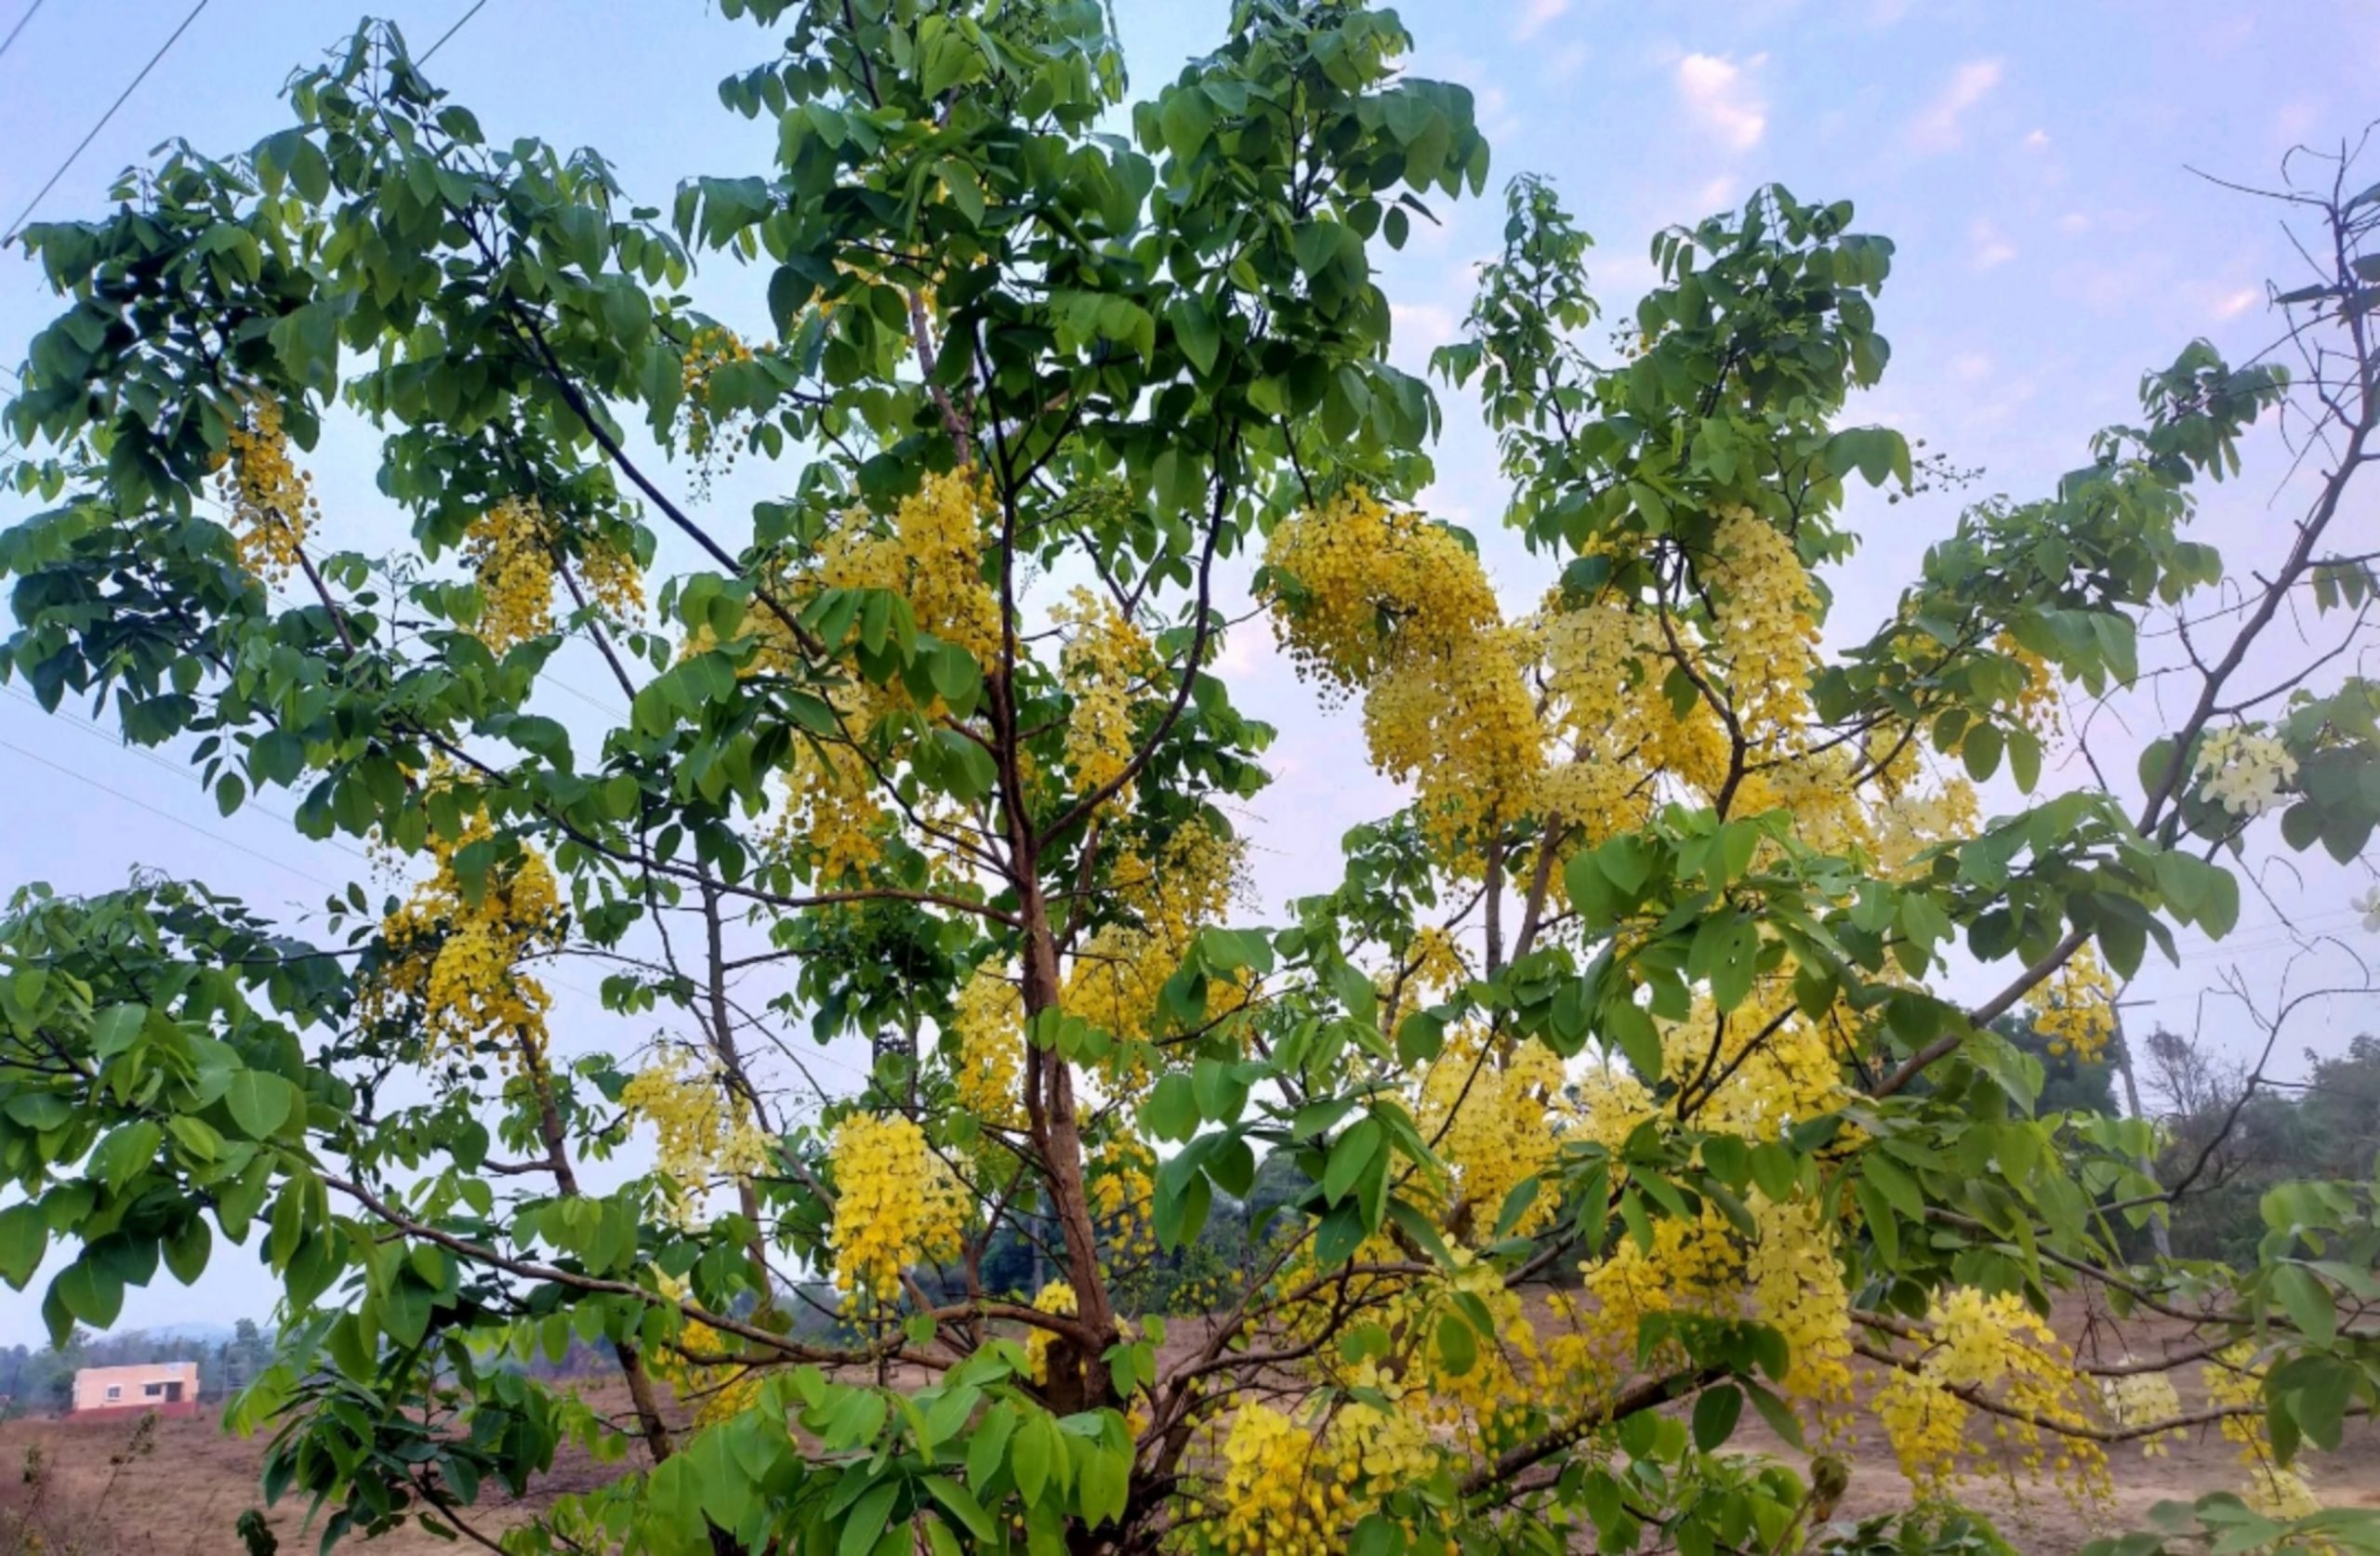 Flowers of a tree